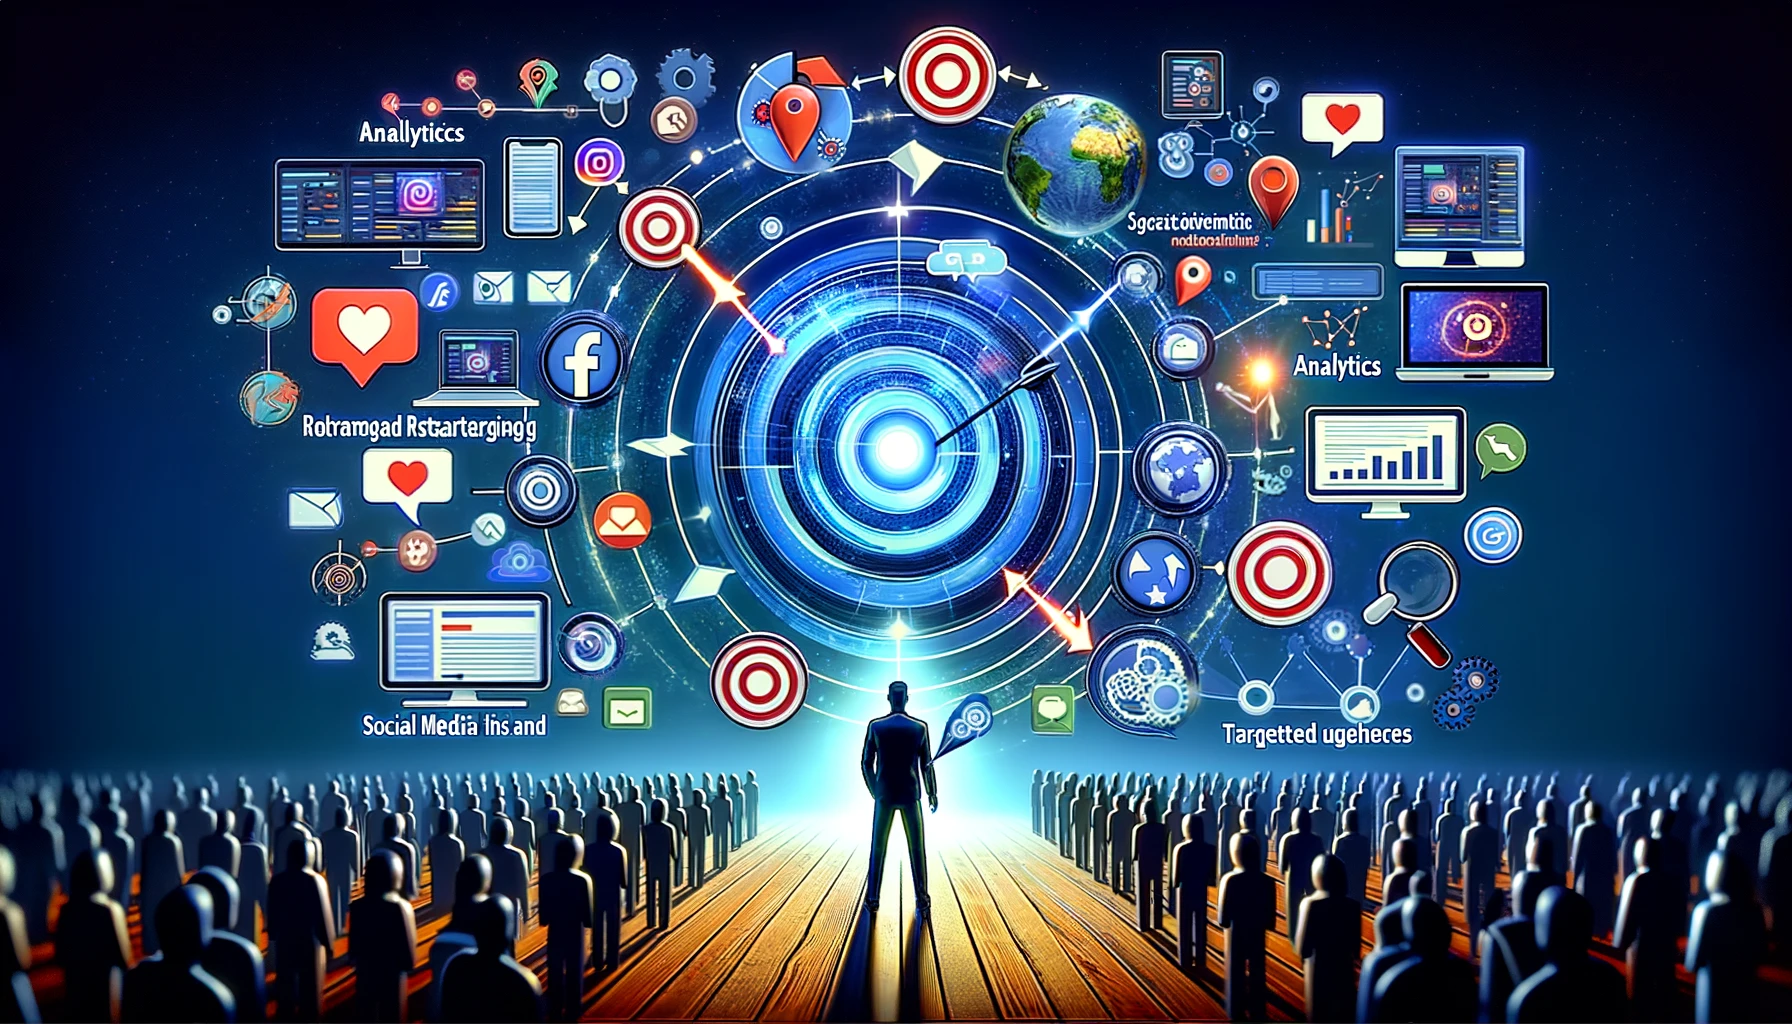 Visual representation of Social Media Retargeting with interconnected social platforms, analytics, and retargeting ad cycles aiming to re-engage previous brand interactions.